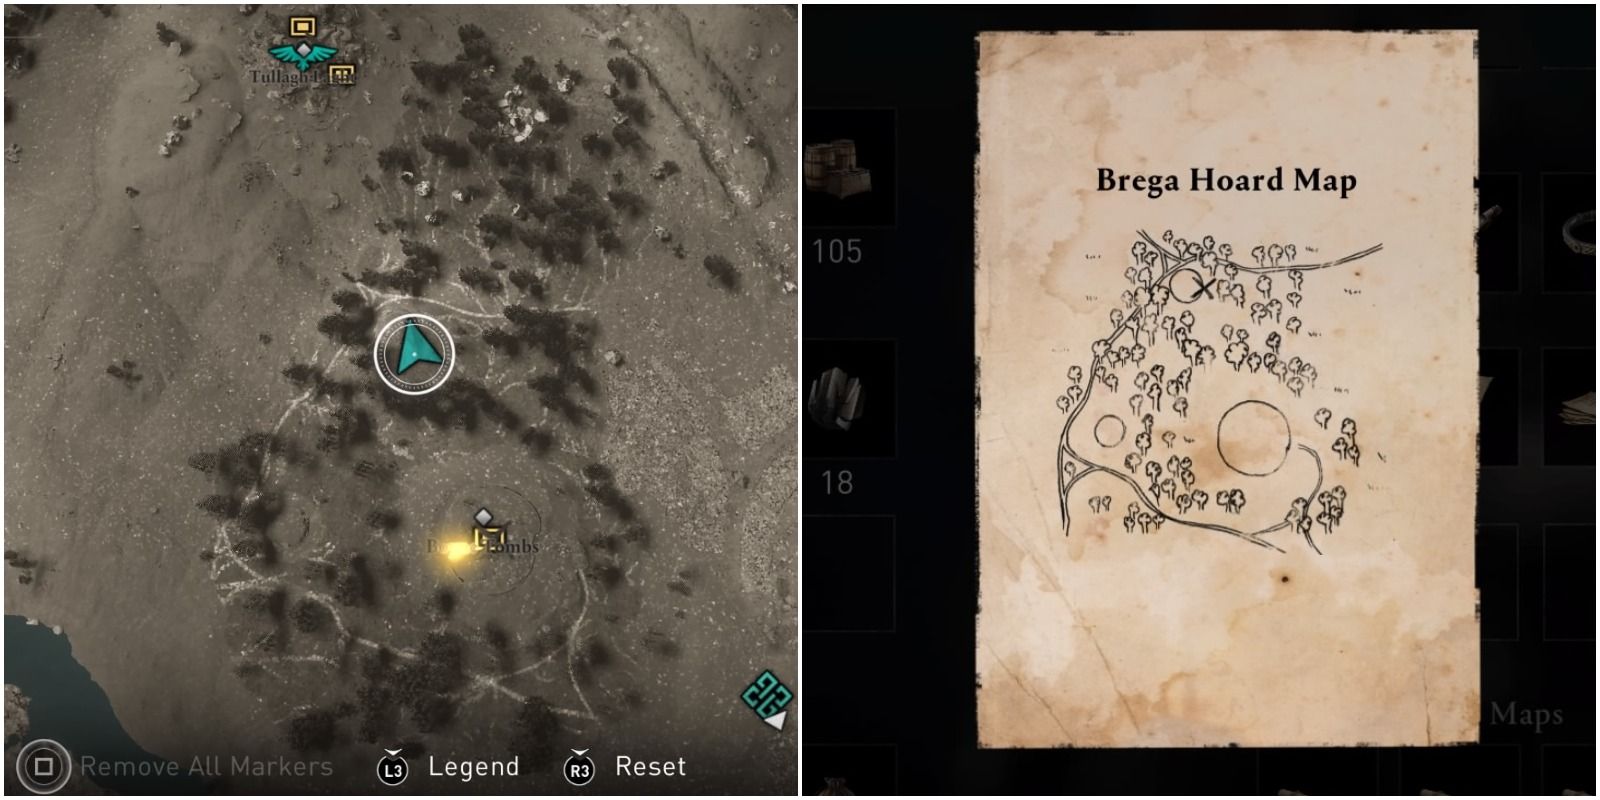 brega hoard map compared to the in-game map.